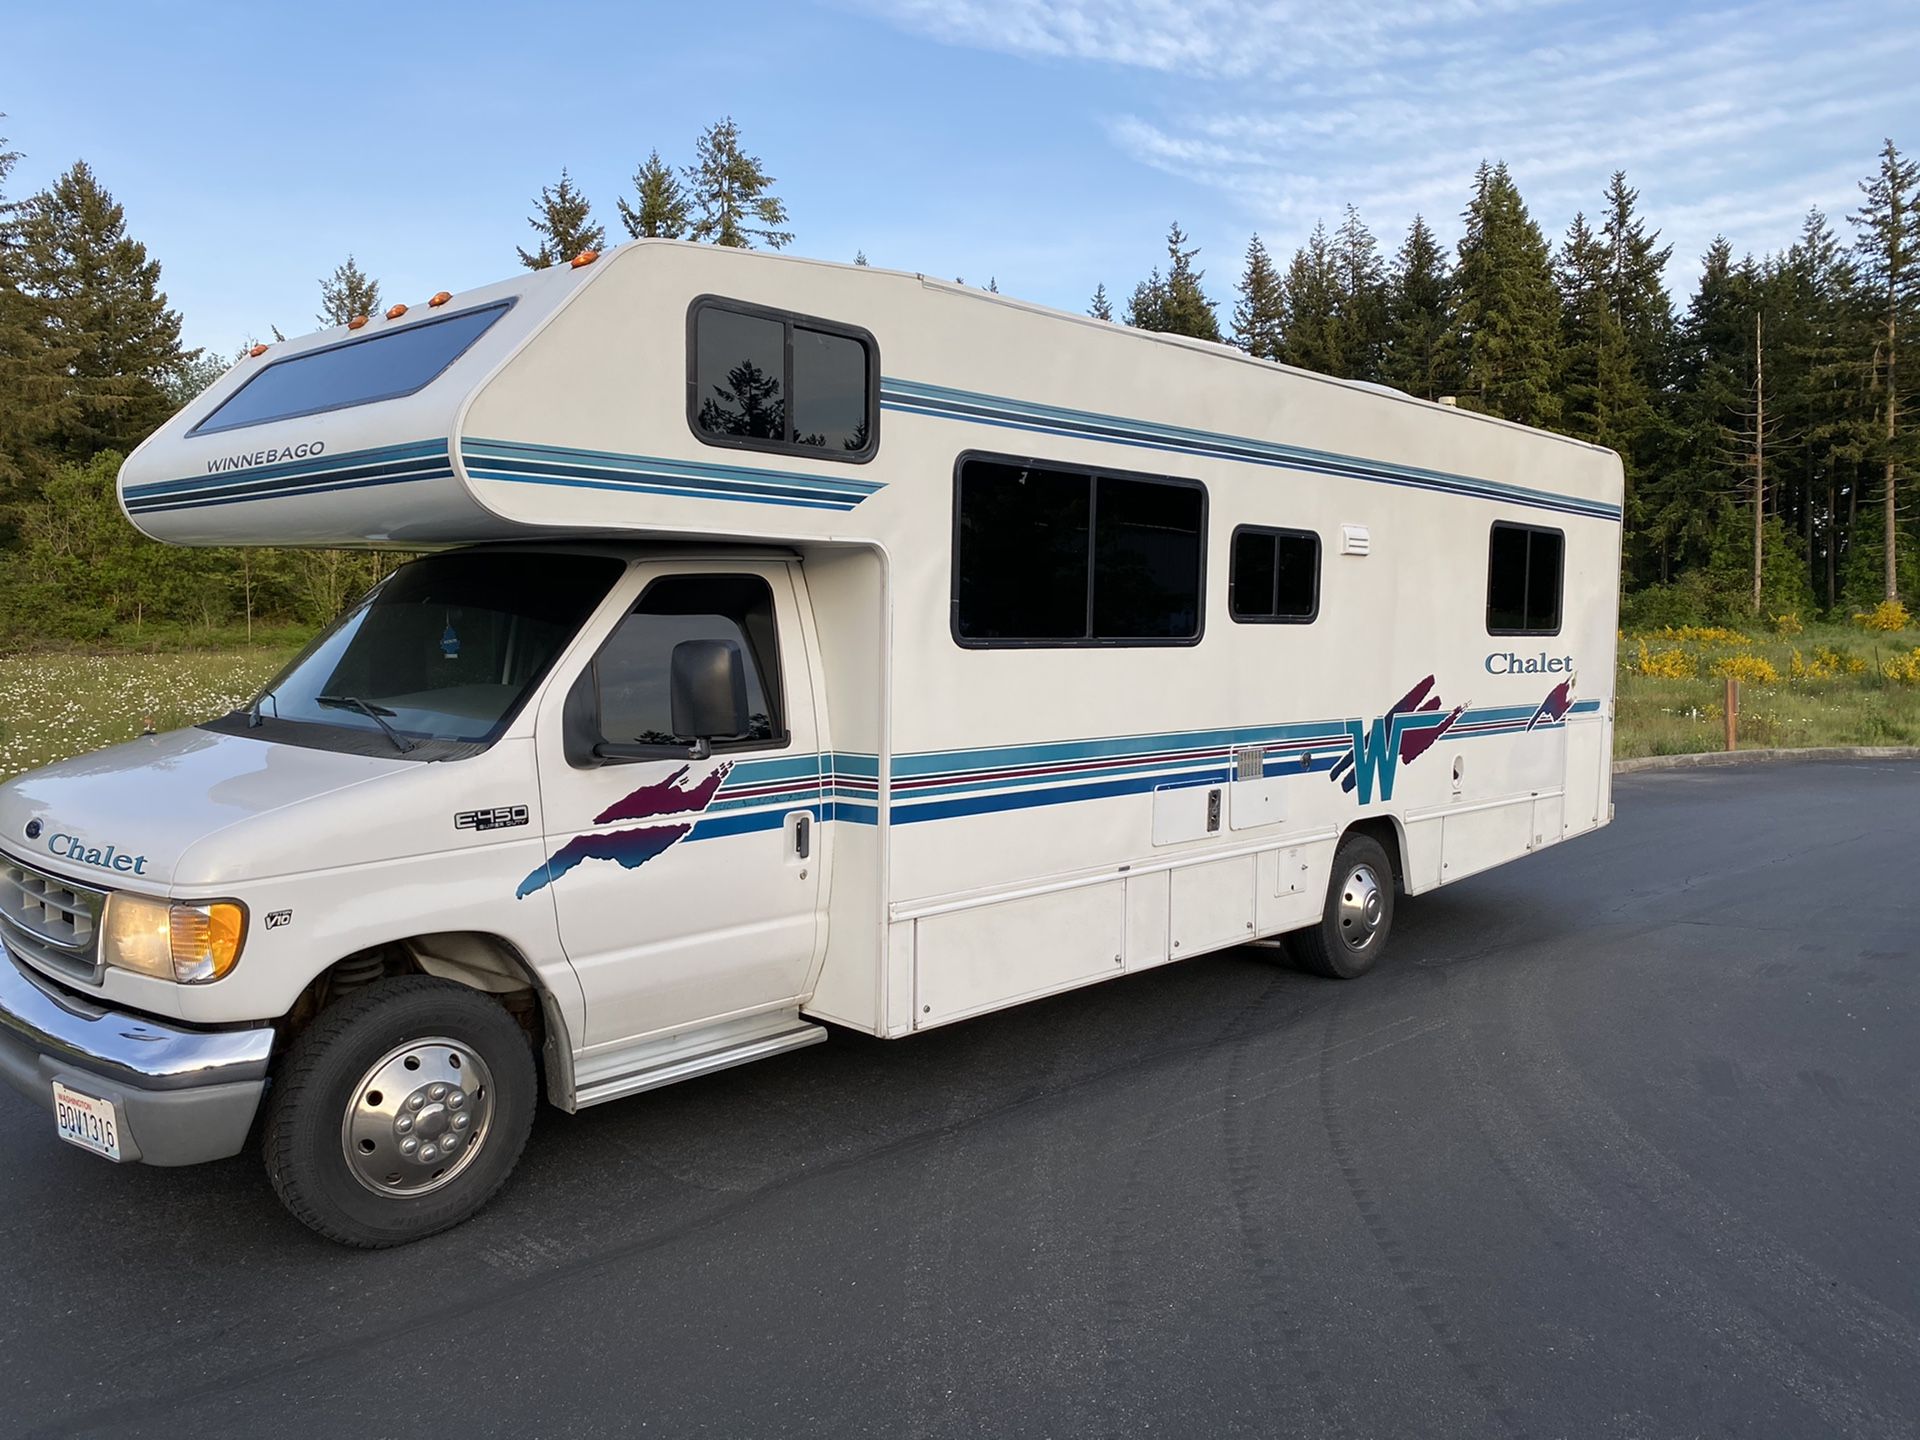 2002 coachman chalet 31FT roof air awning Only 49,000 original miles Basement model Ford chassis E-450 V10 Onan generator with low hours